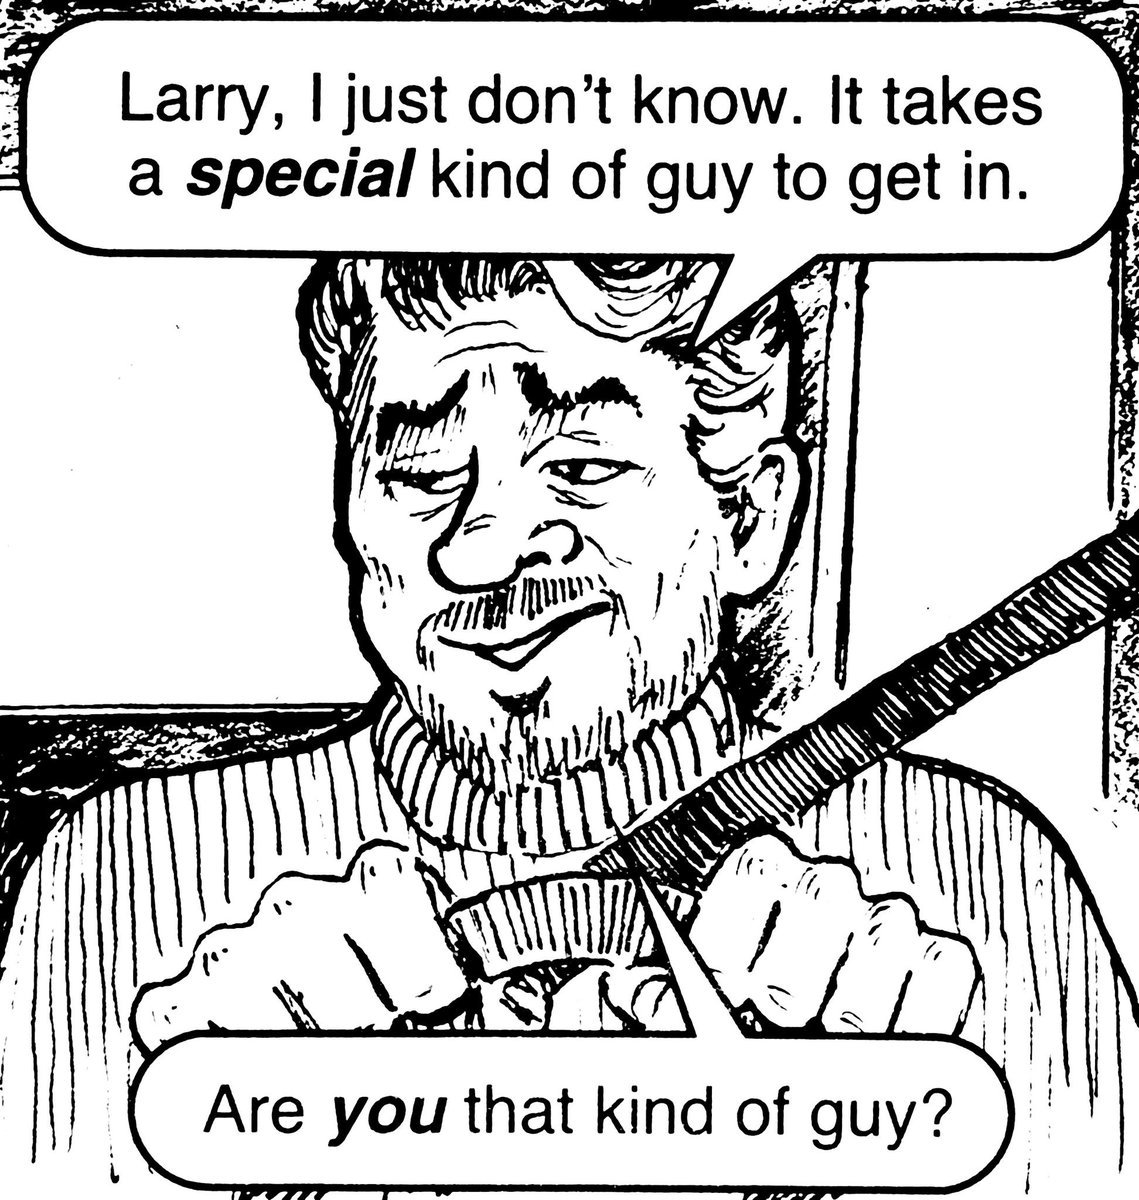 No Context Chick Tracts (@No_Context_JTC) on Twitter photo 2024-01-02 02:09:12